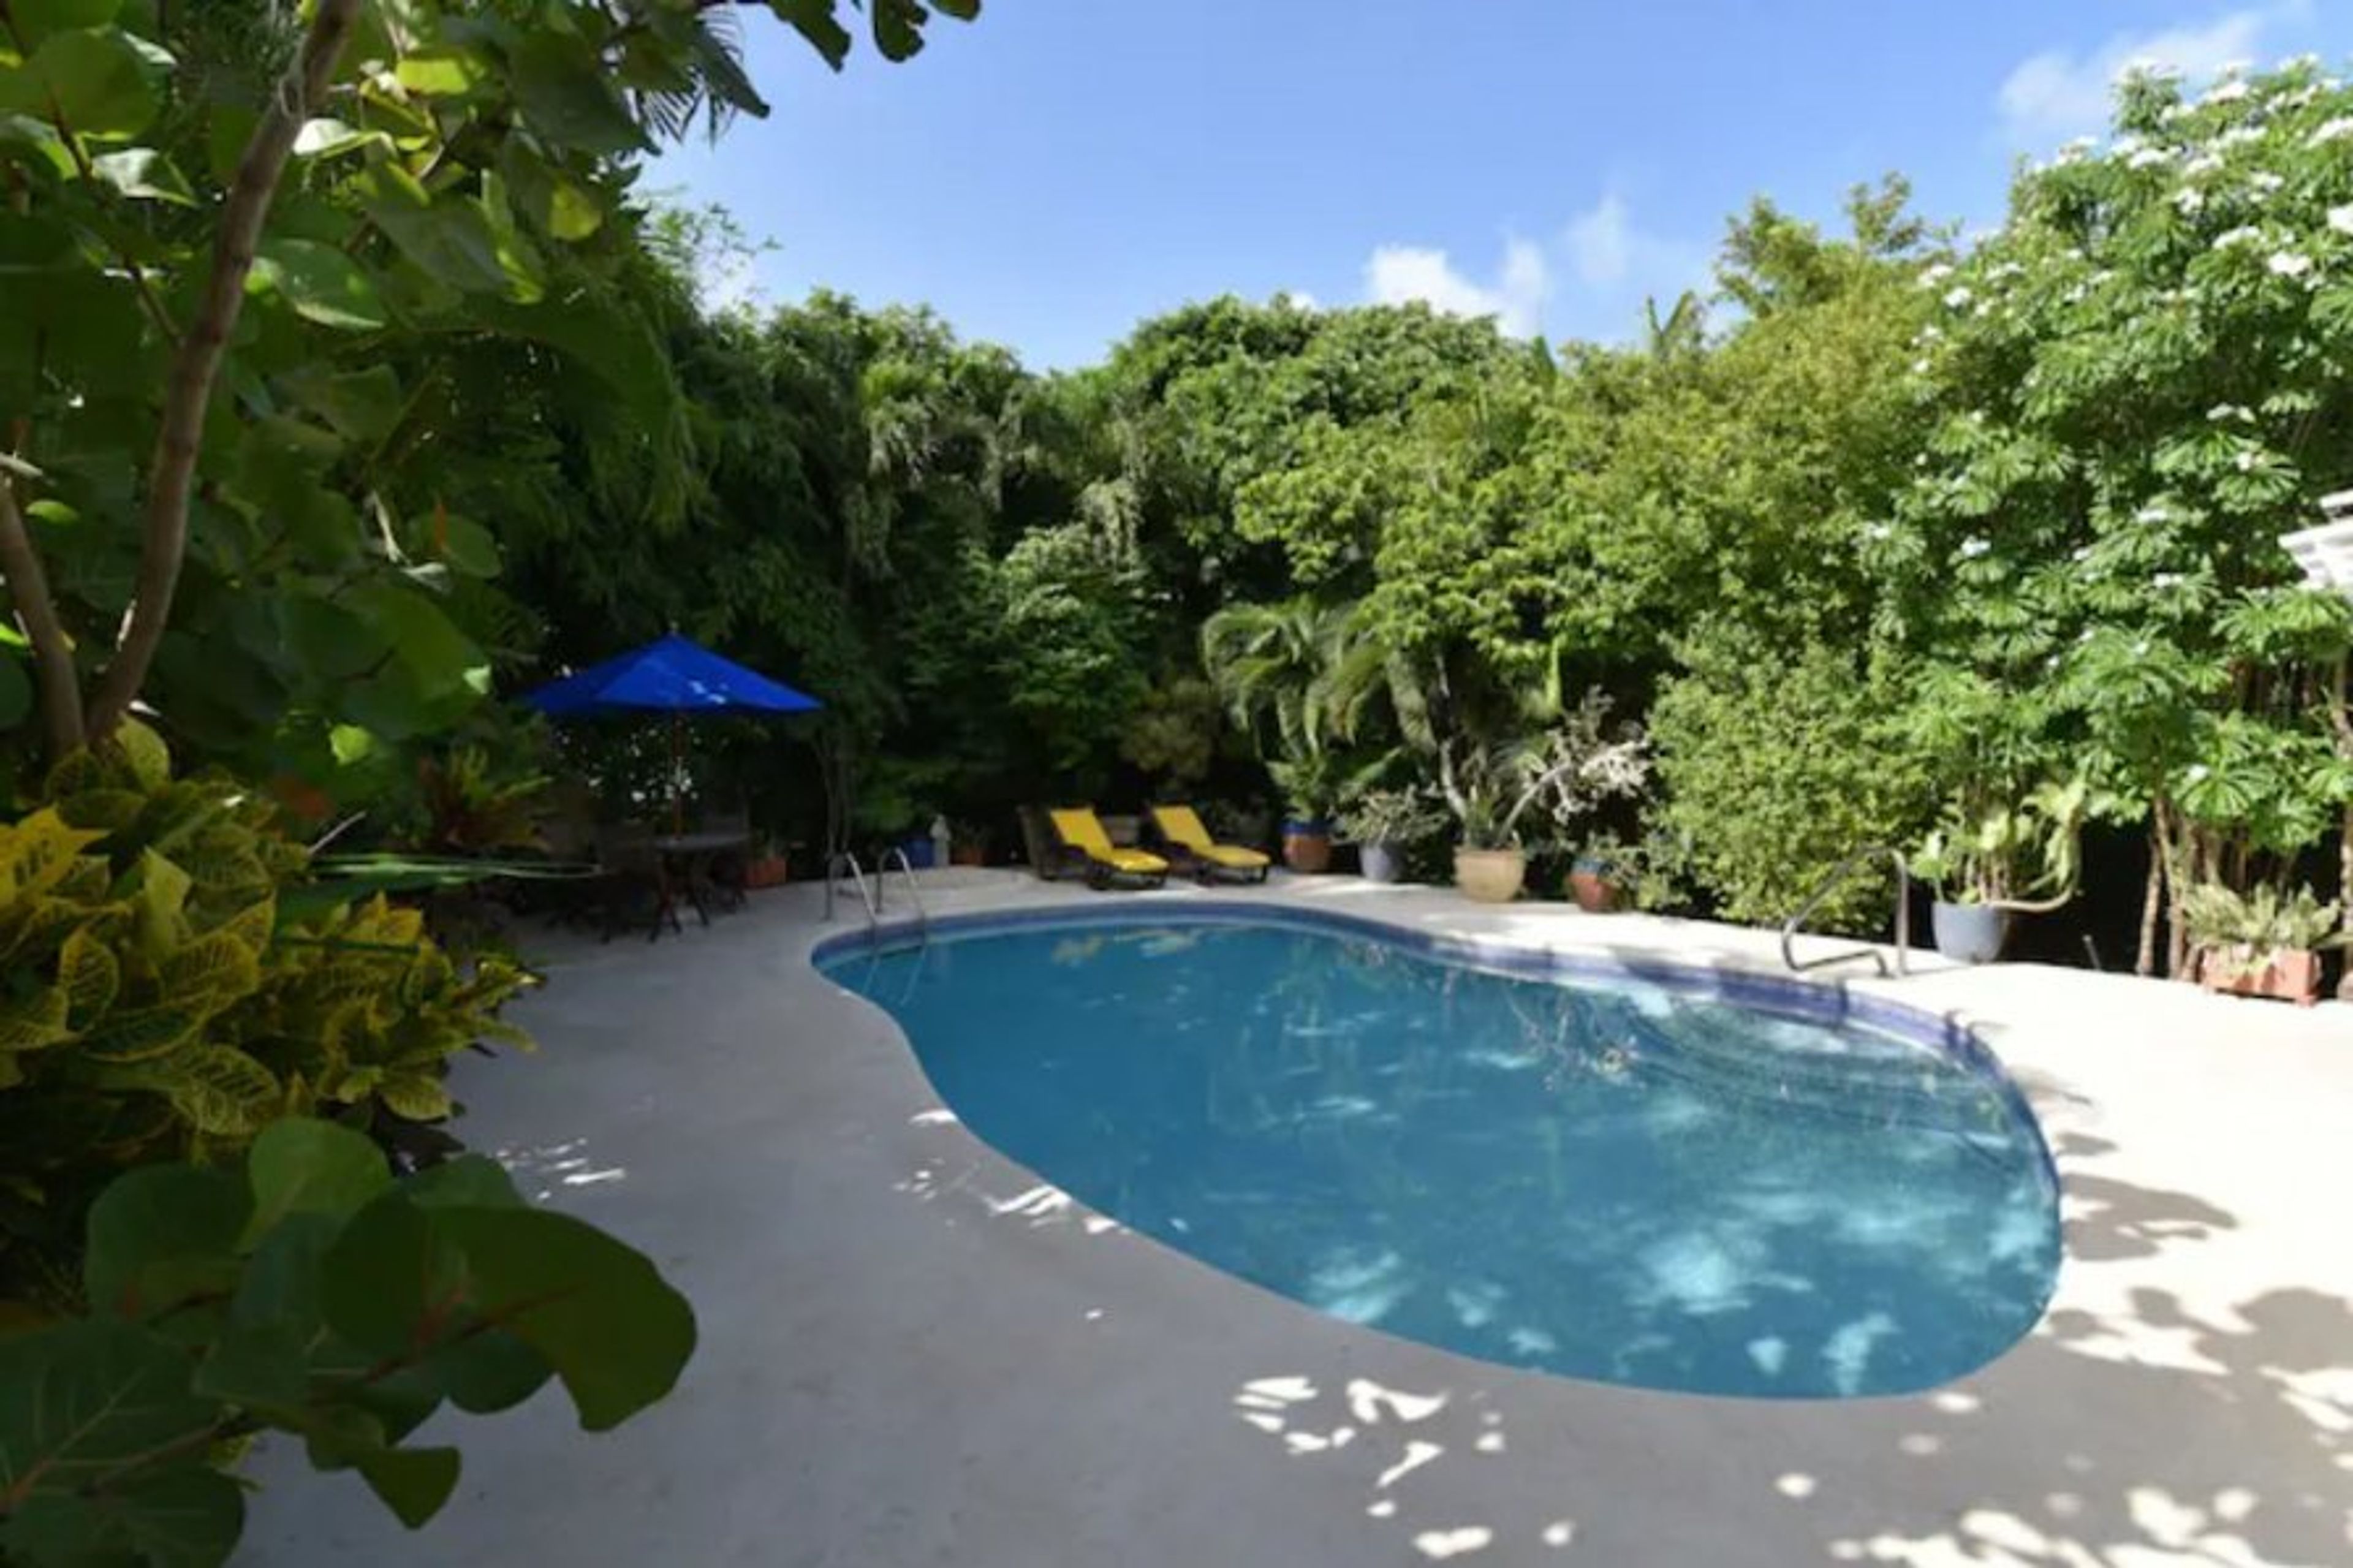 The outside pool surrounded by palm trees, ficus, starfruit tree.